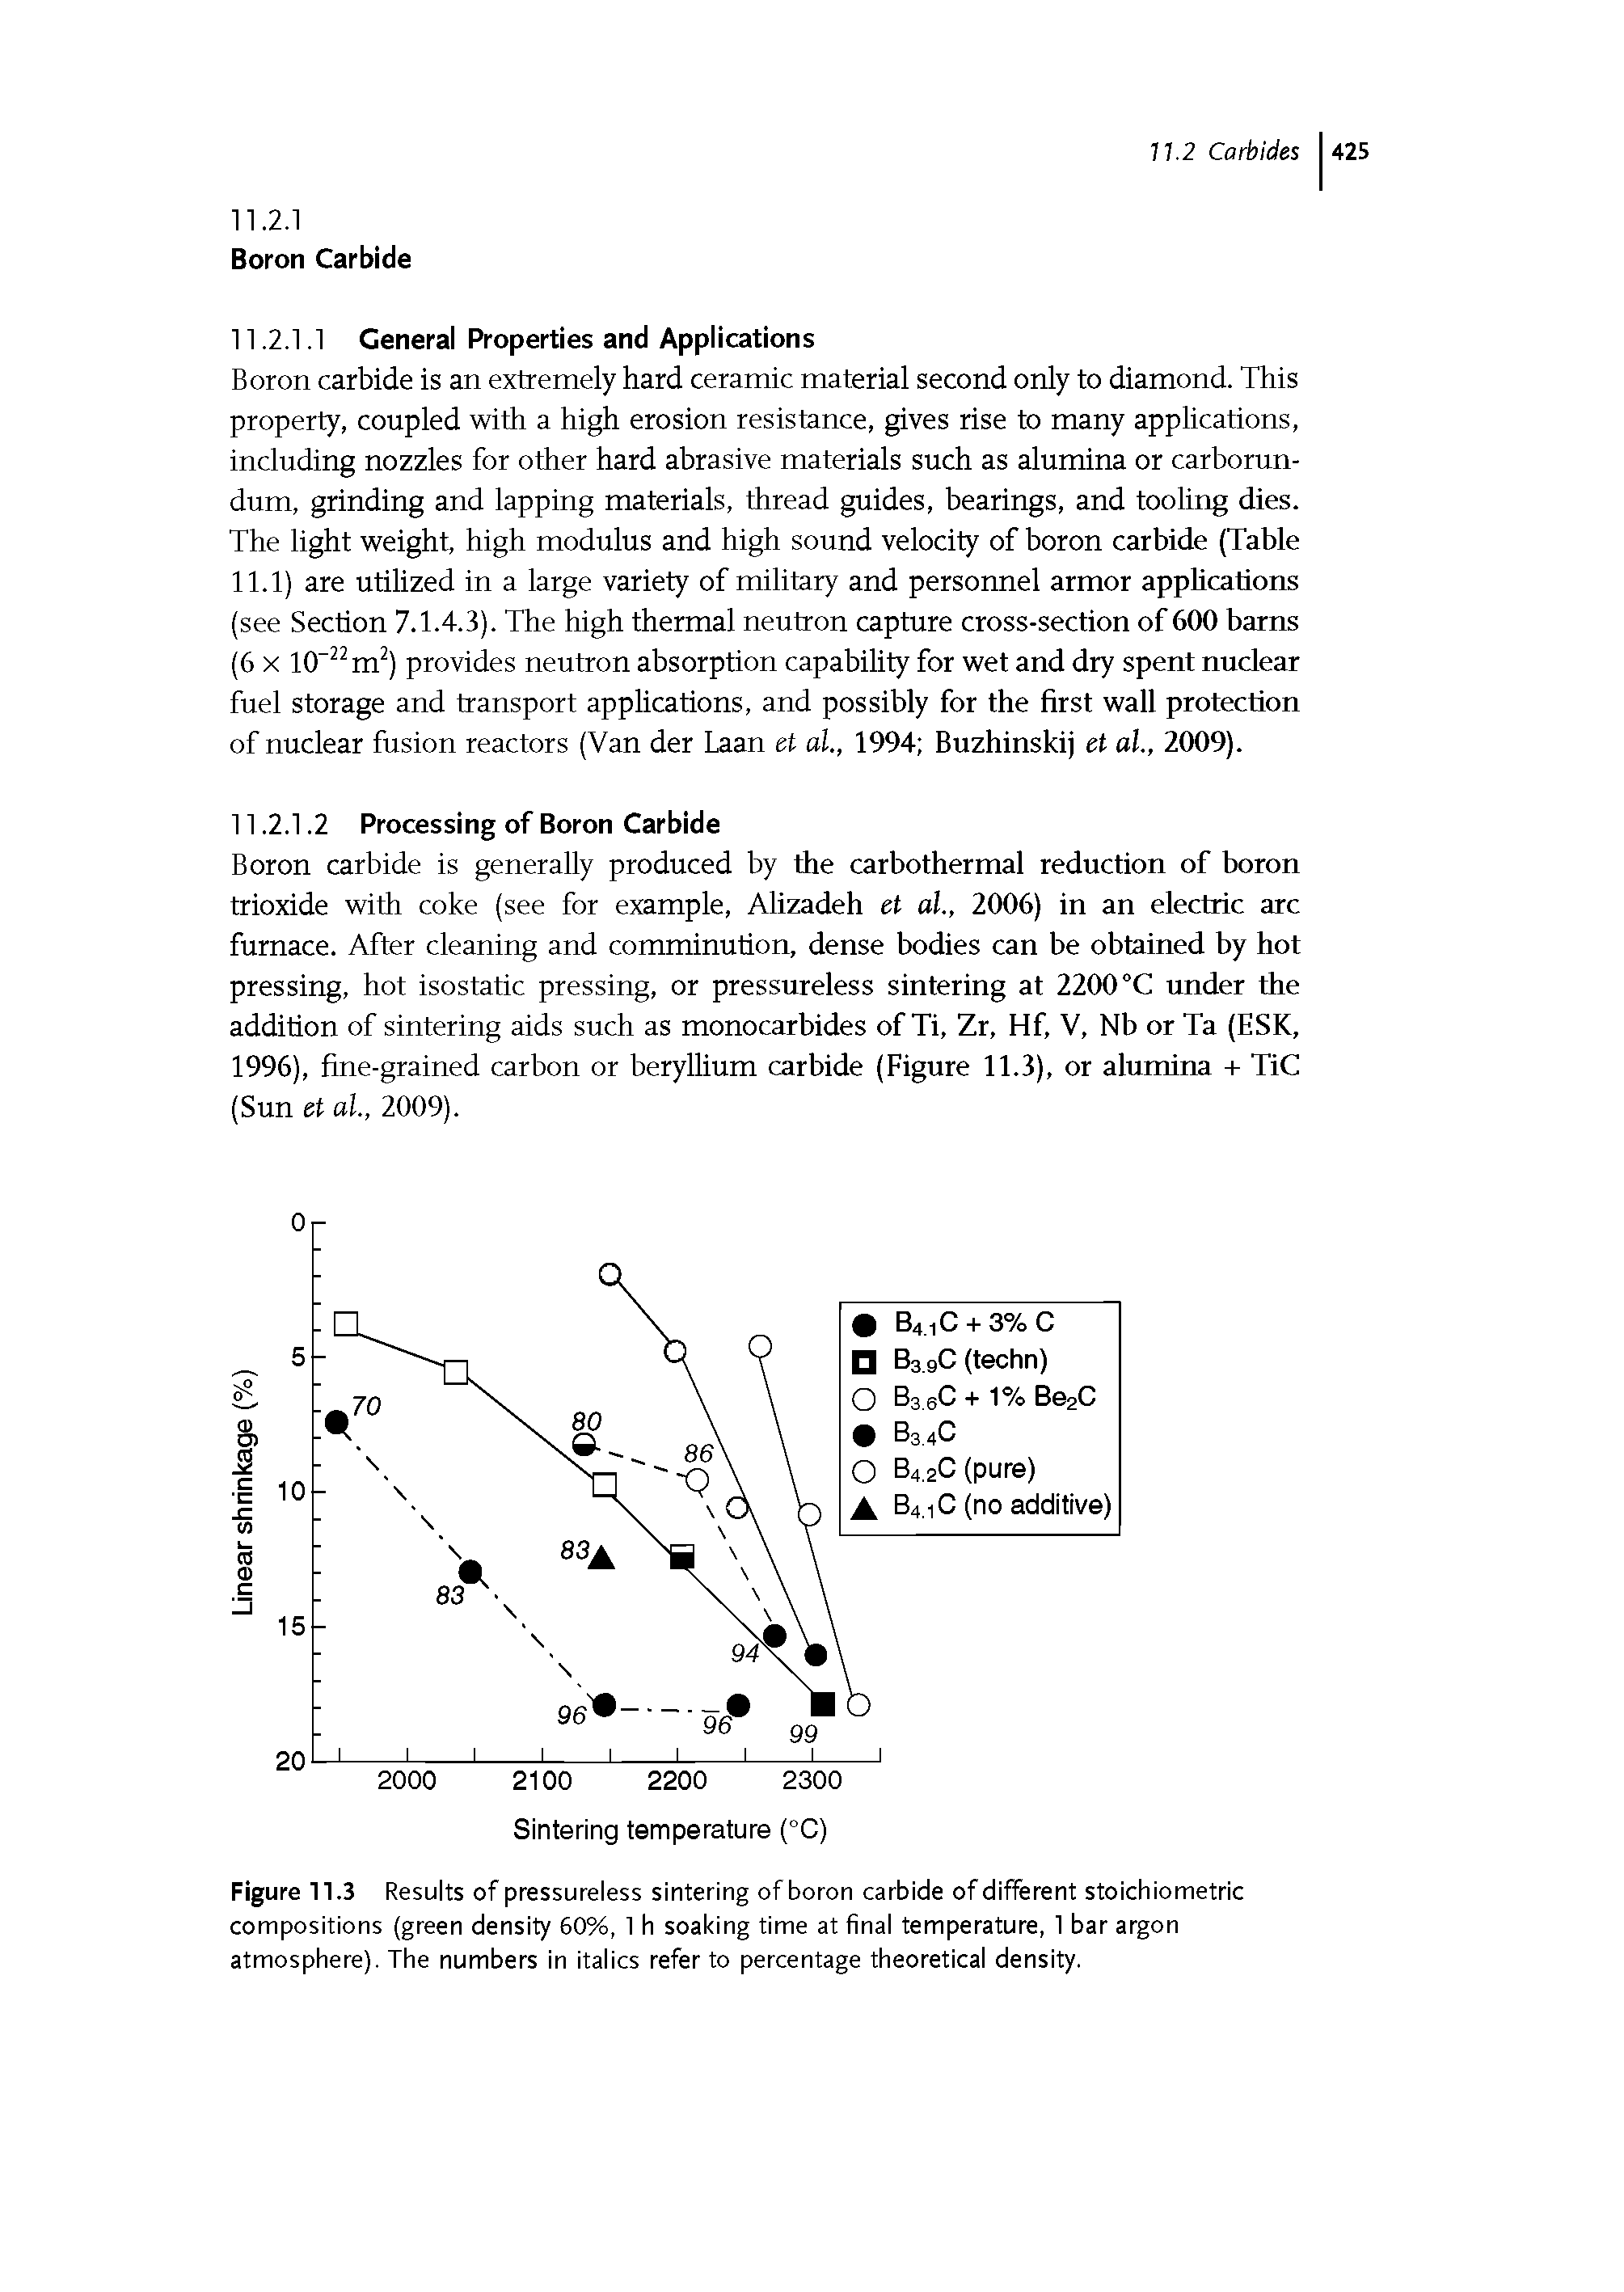 Figure 11.3 Results of pressureless sintering of boron carbide of different stoichiometric compositions (green density 60%, 1 h soaking time at final temperature, 1 bar argon atmosphere). The numbers in italics refer to percentage theoretical density.